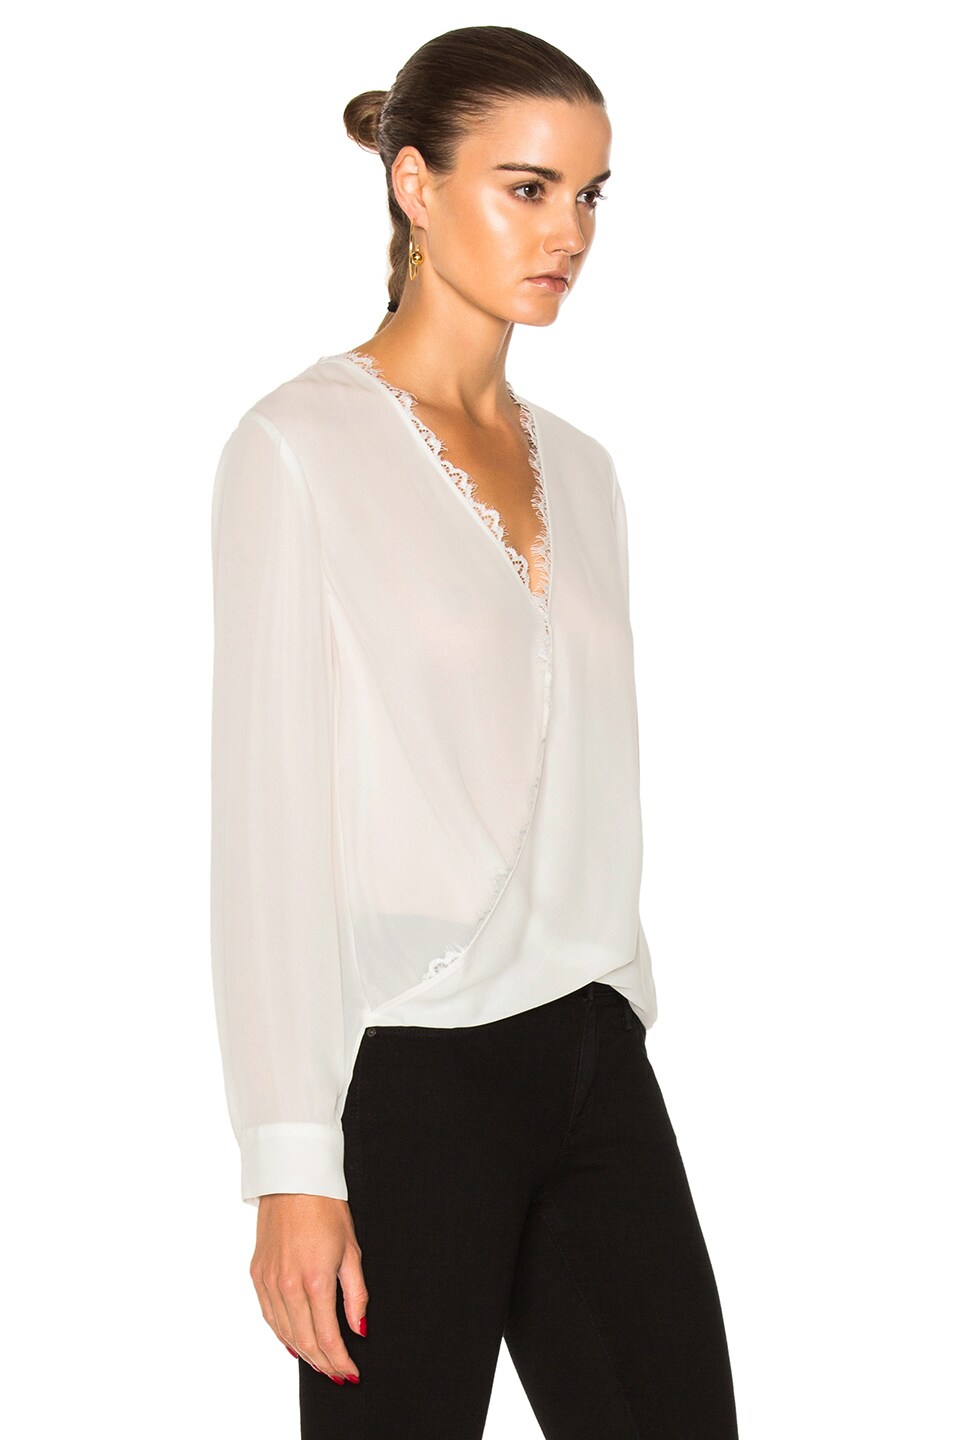 L'AGENCE Rosario Top, Ivory | ModeSens